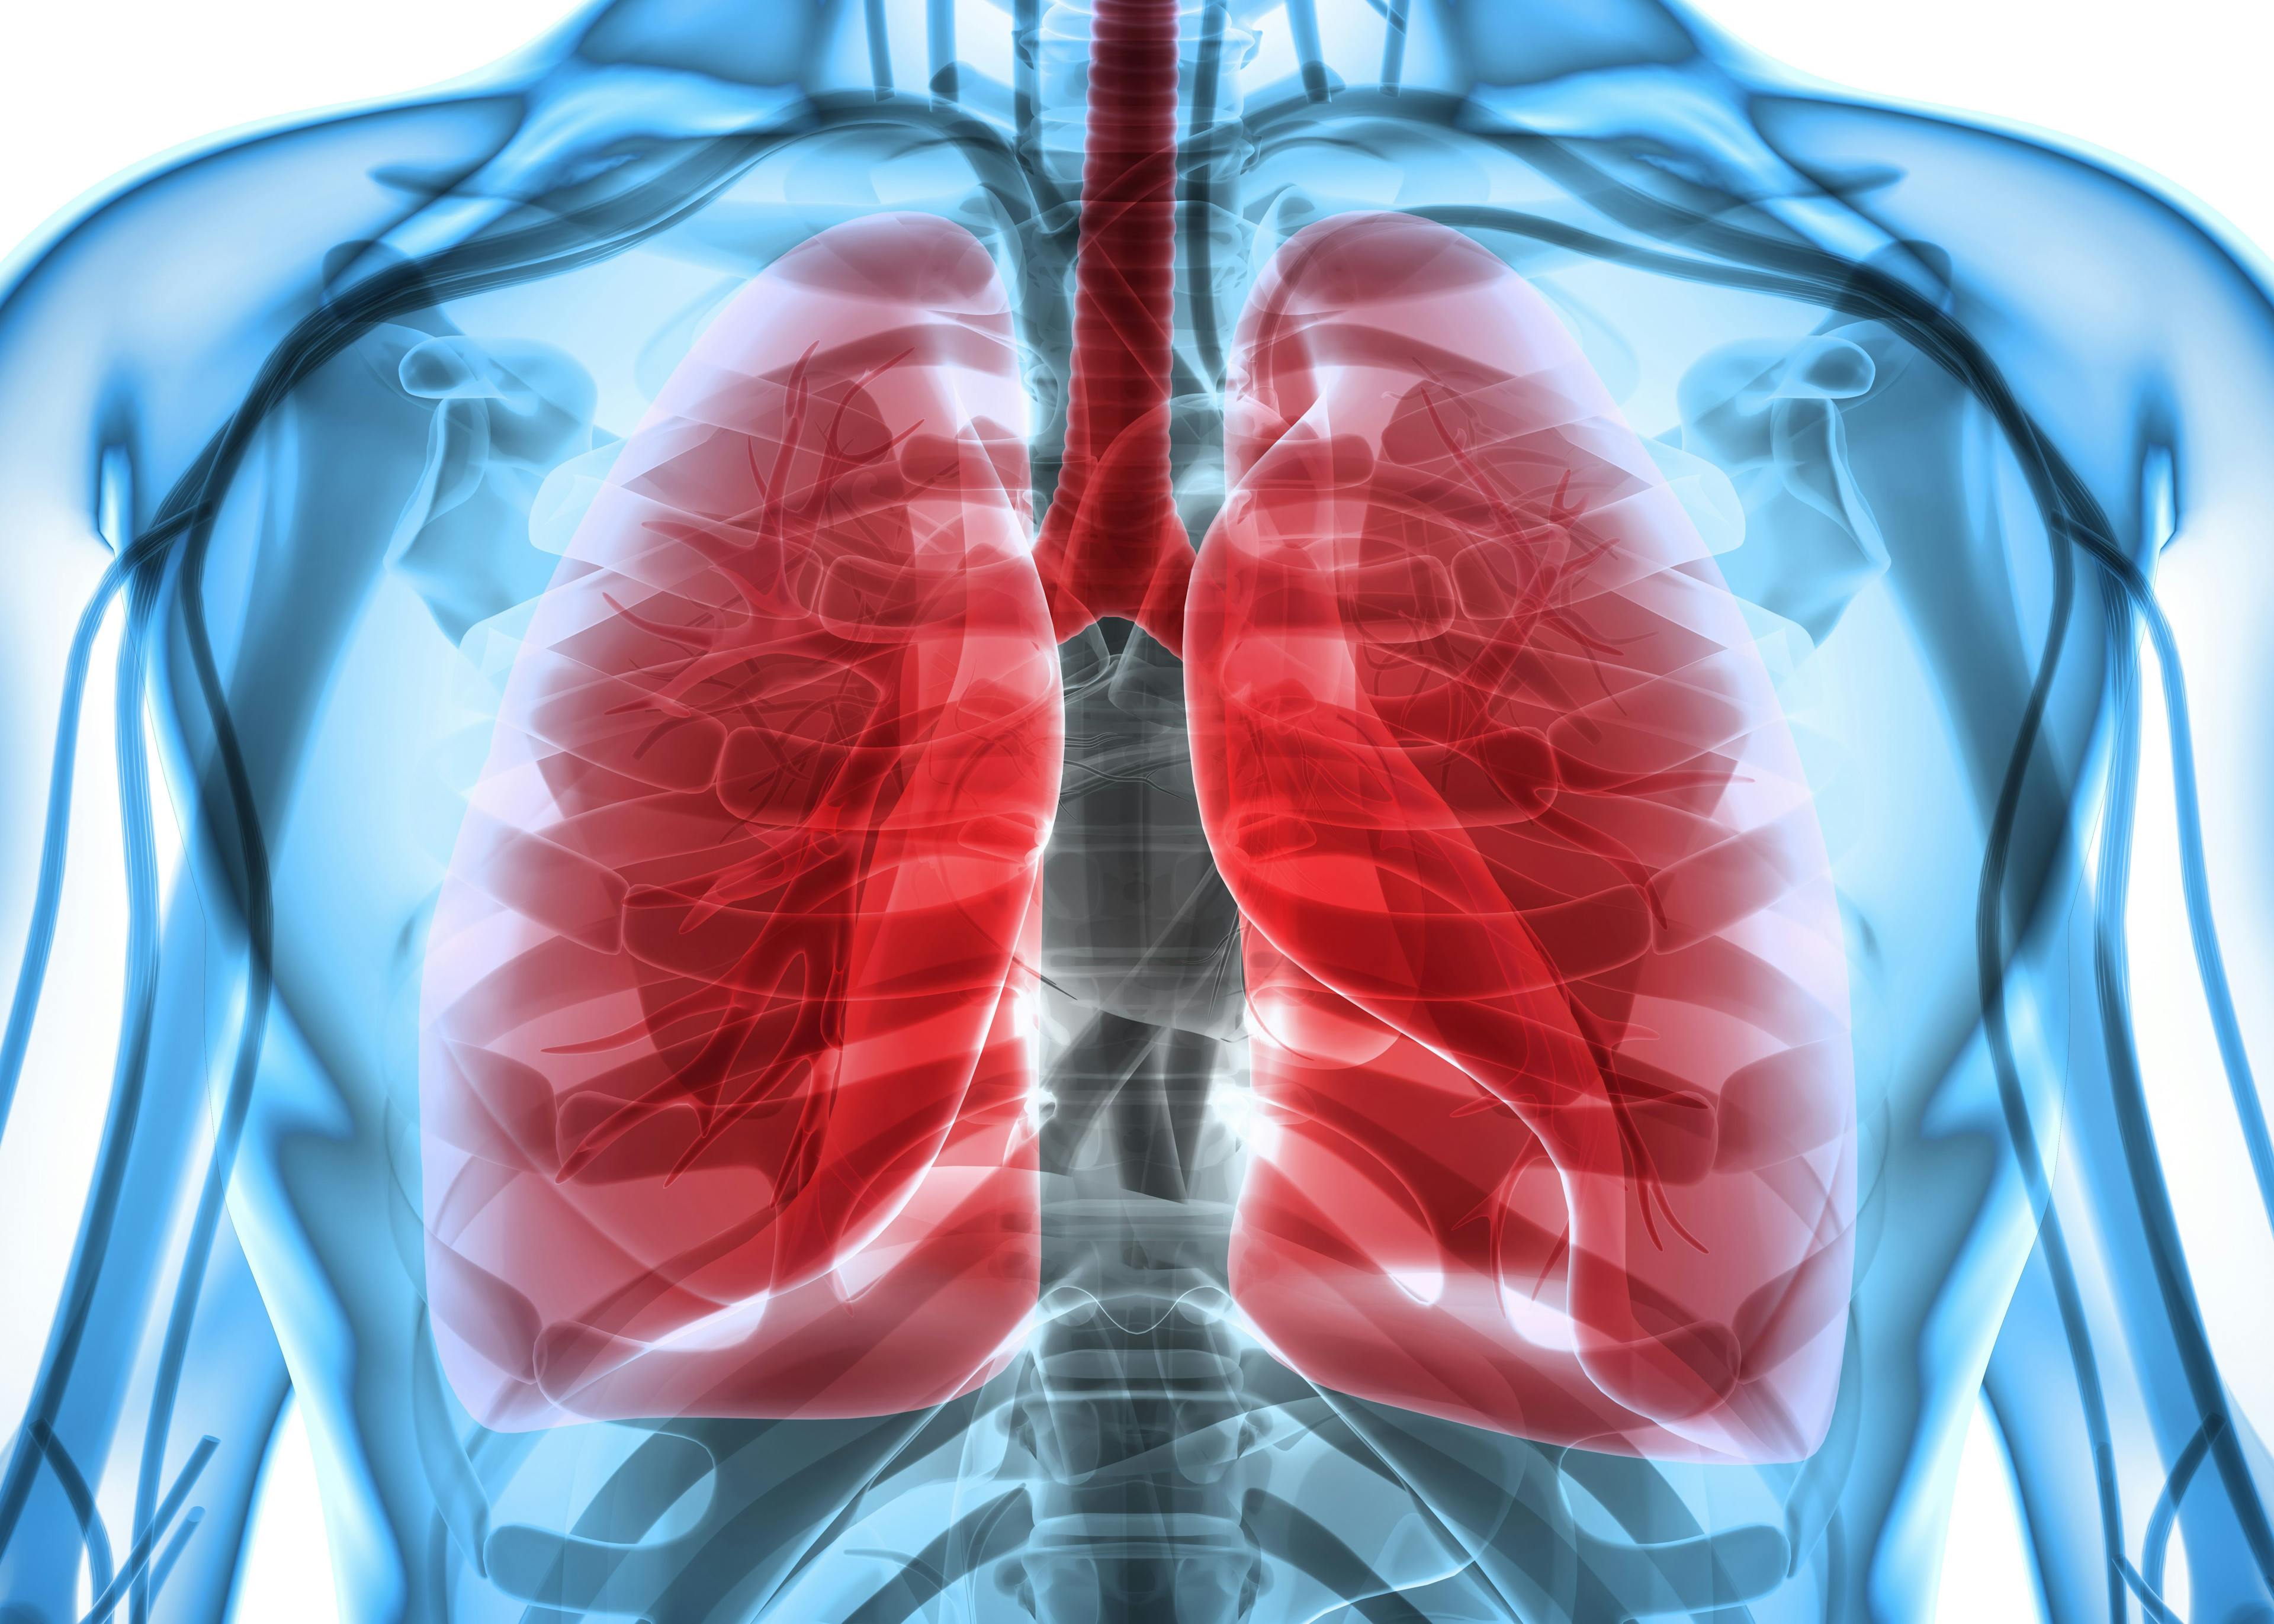 Sotorasib Produces Durable Clinical Benefit in Treatment of KRAS p.G12C + NSCLC 